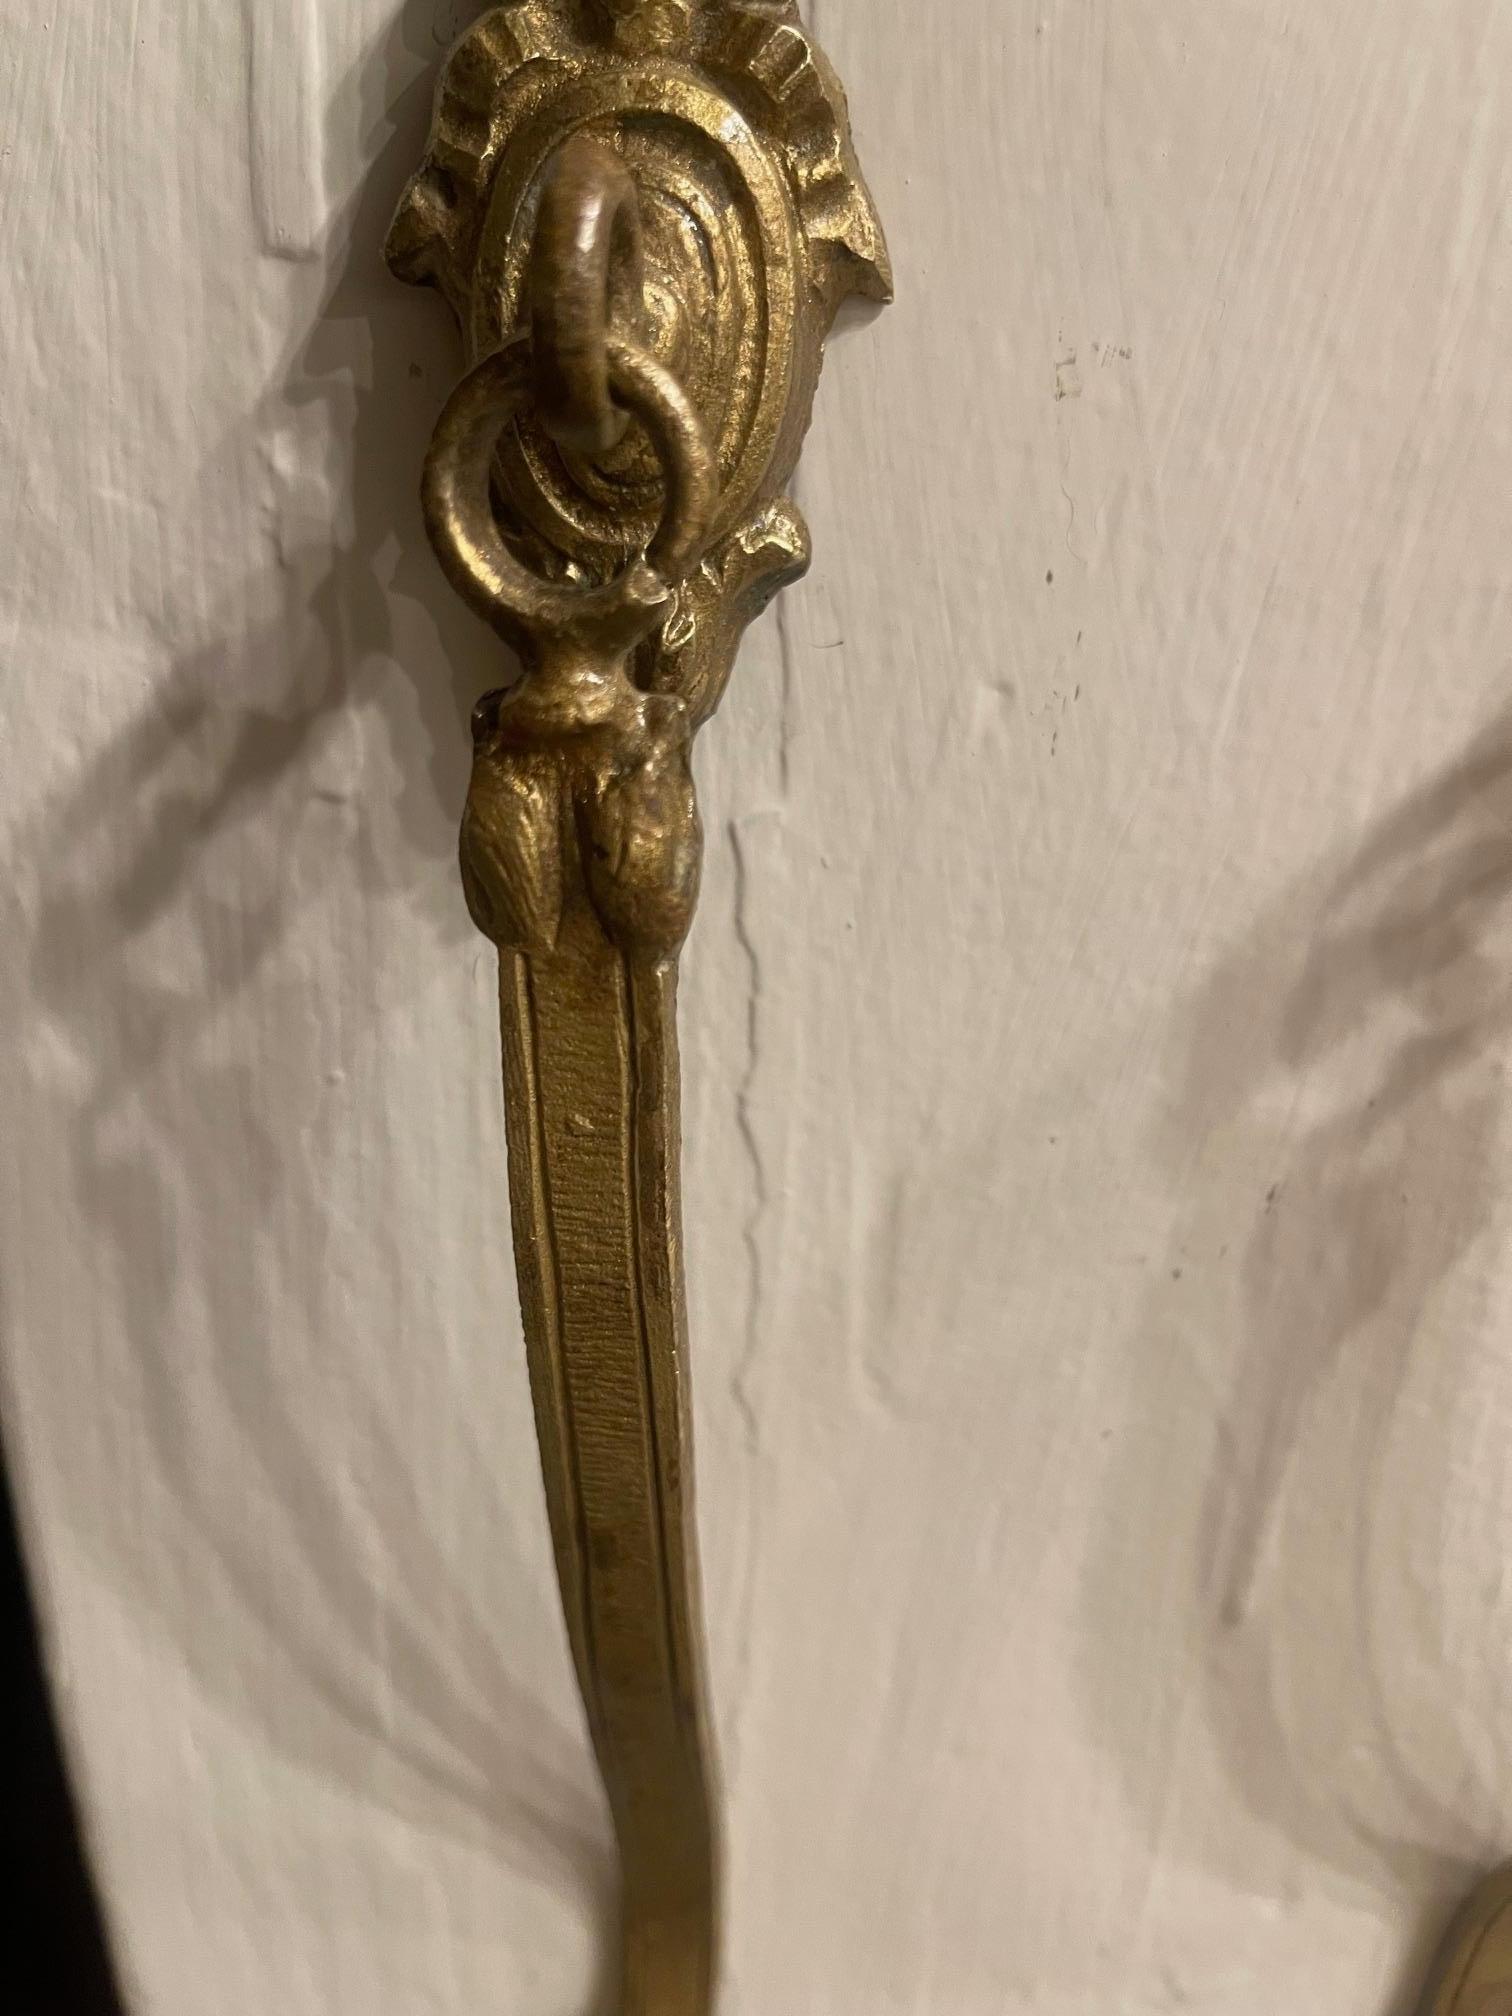 Pair of French Bronze and Brass Curtain Tiebacks or Curtain Holder, 19th Century For Sale 5